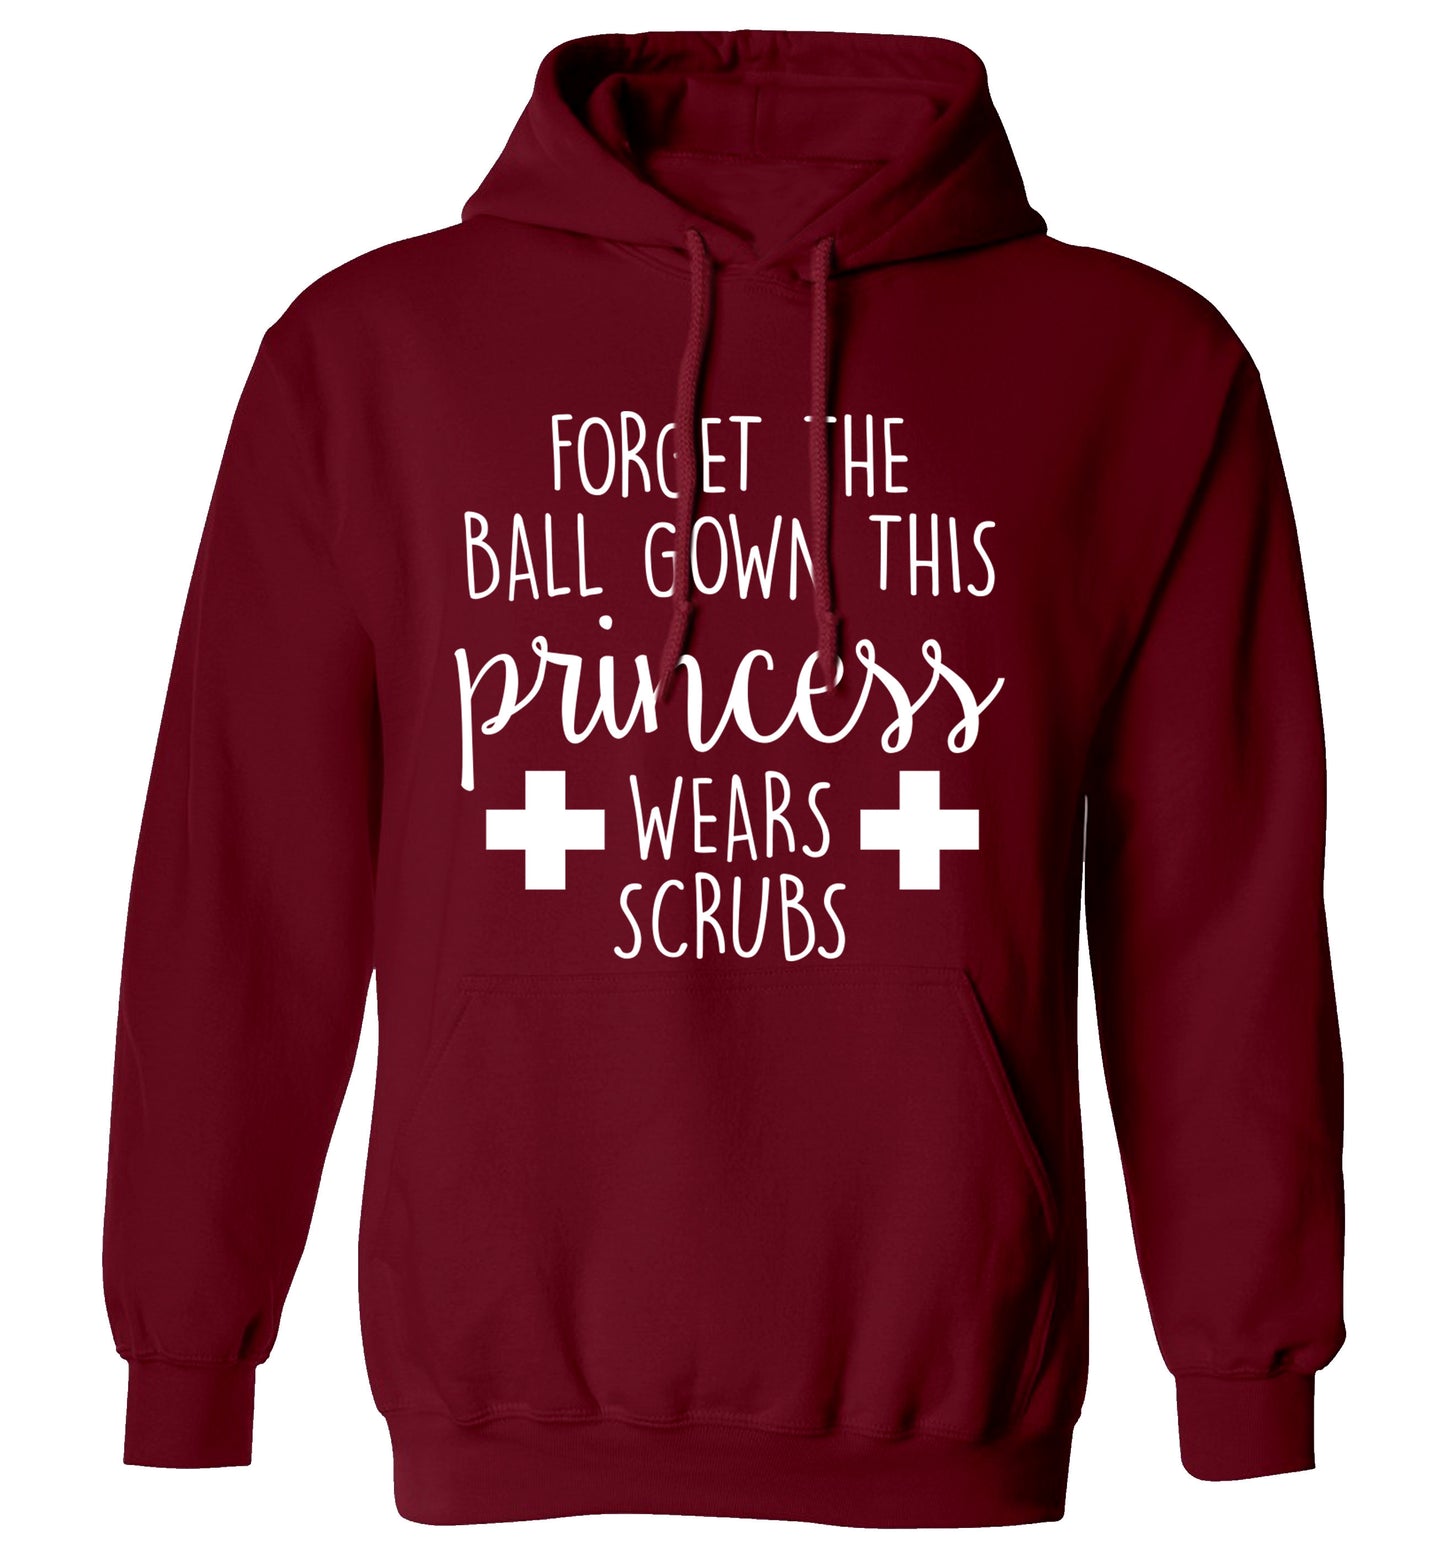 Forget the ball gown this princess wears scrubs adults unisex maroon hoodie 2XL